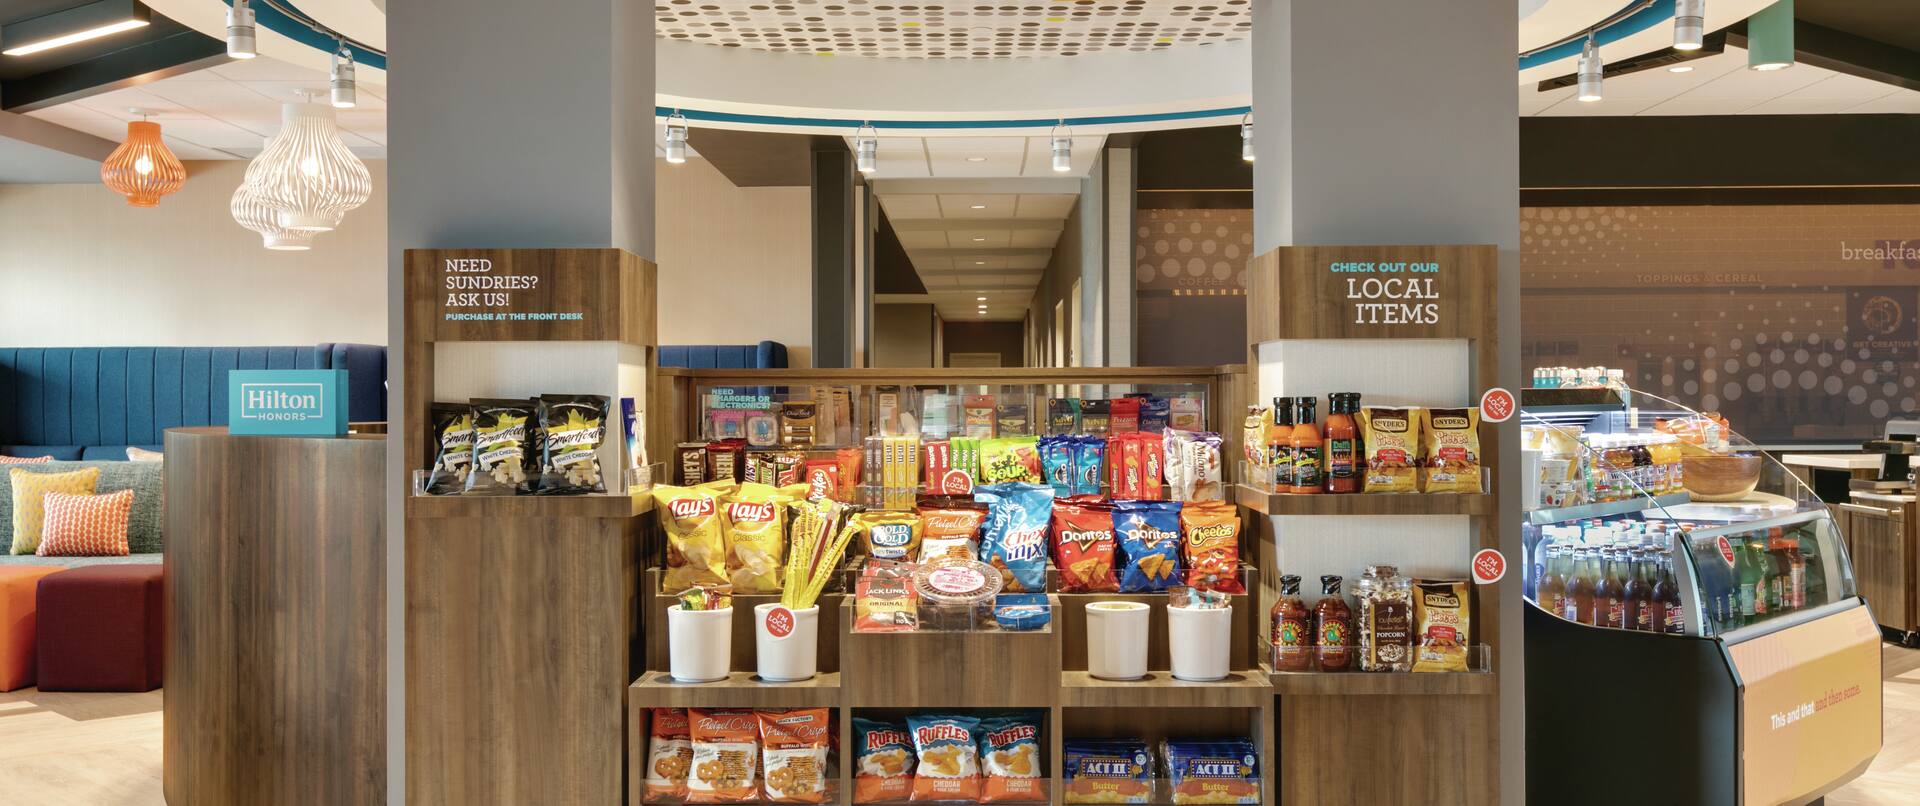 Breakfast area with food options